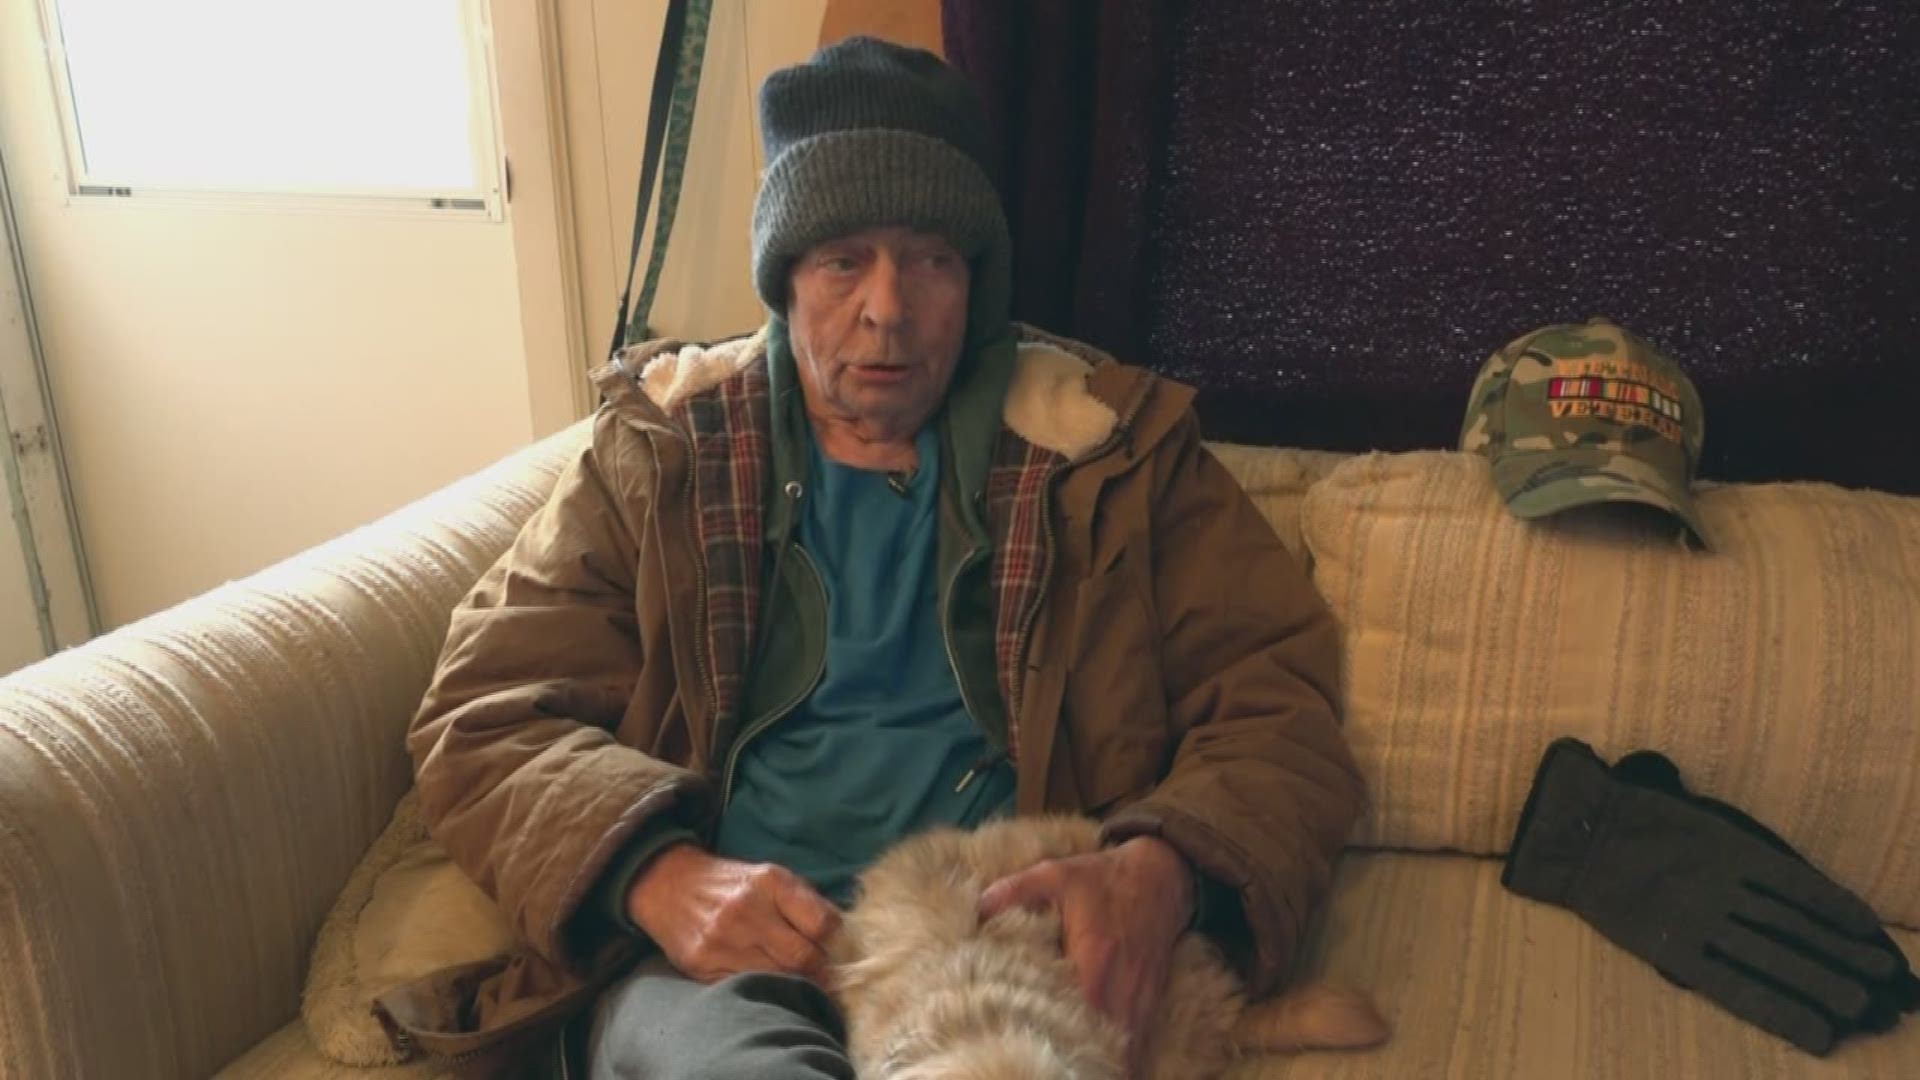 Couple takes in homeless vet and pets